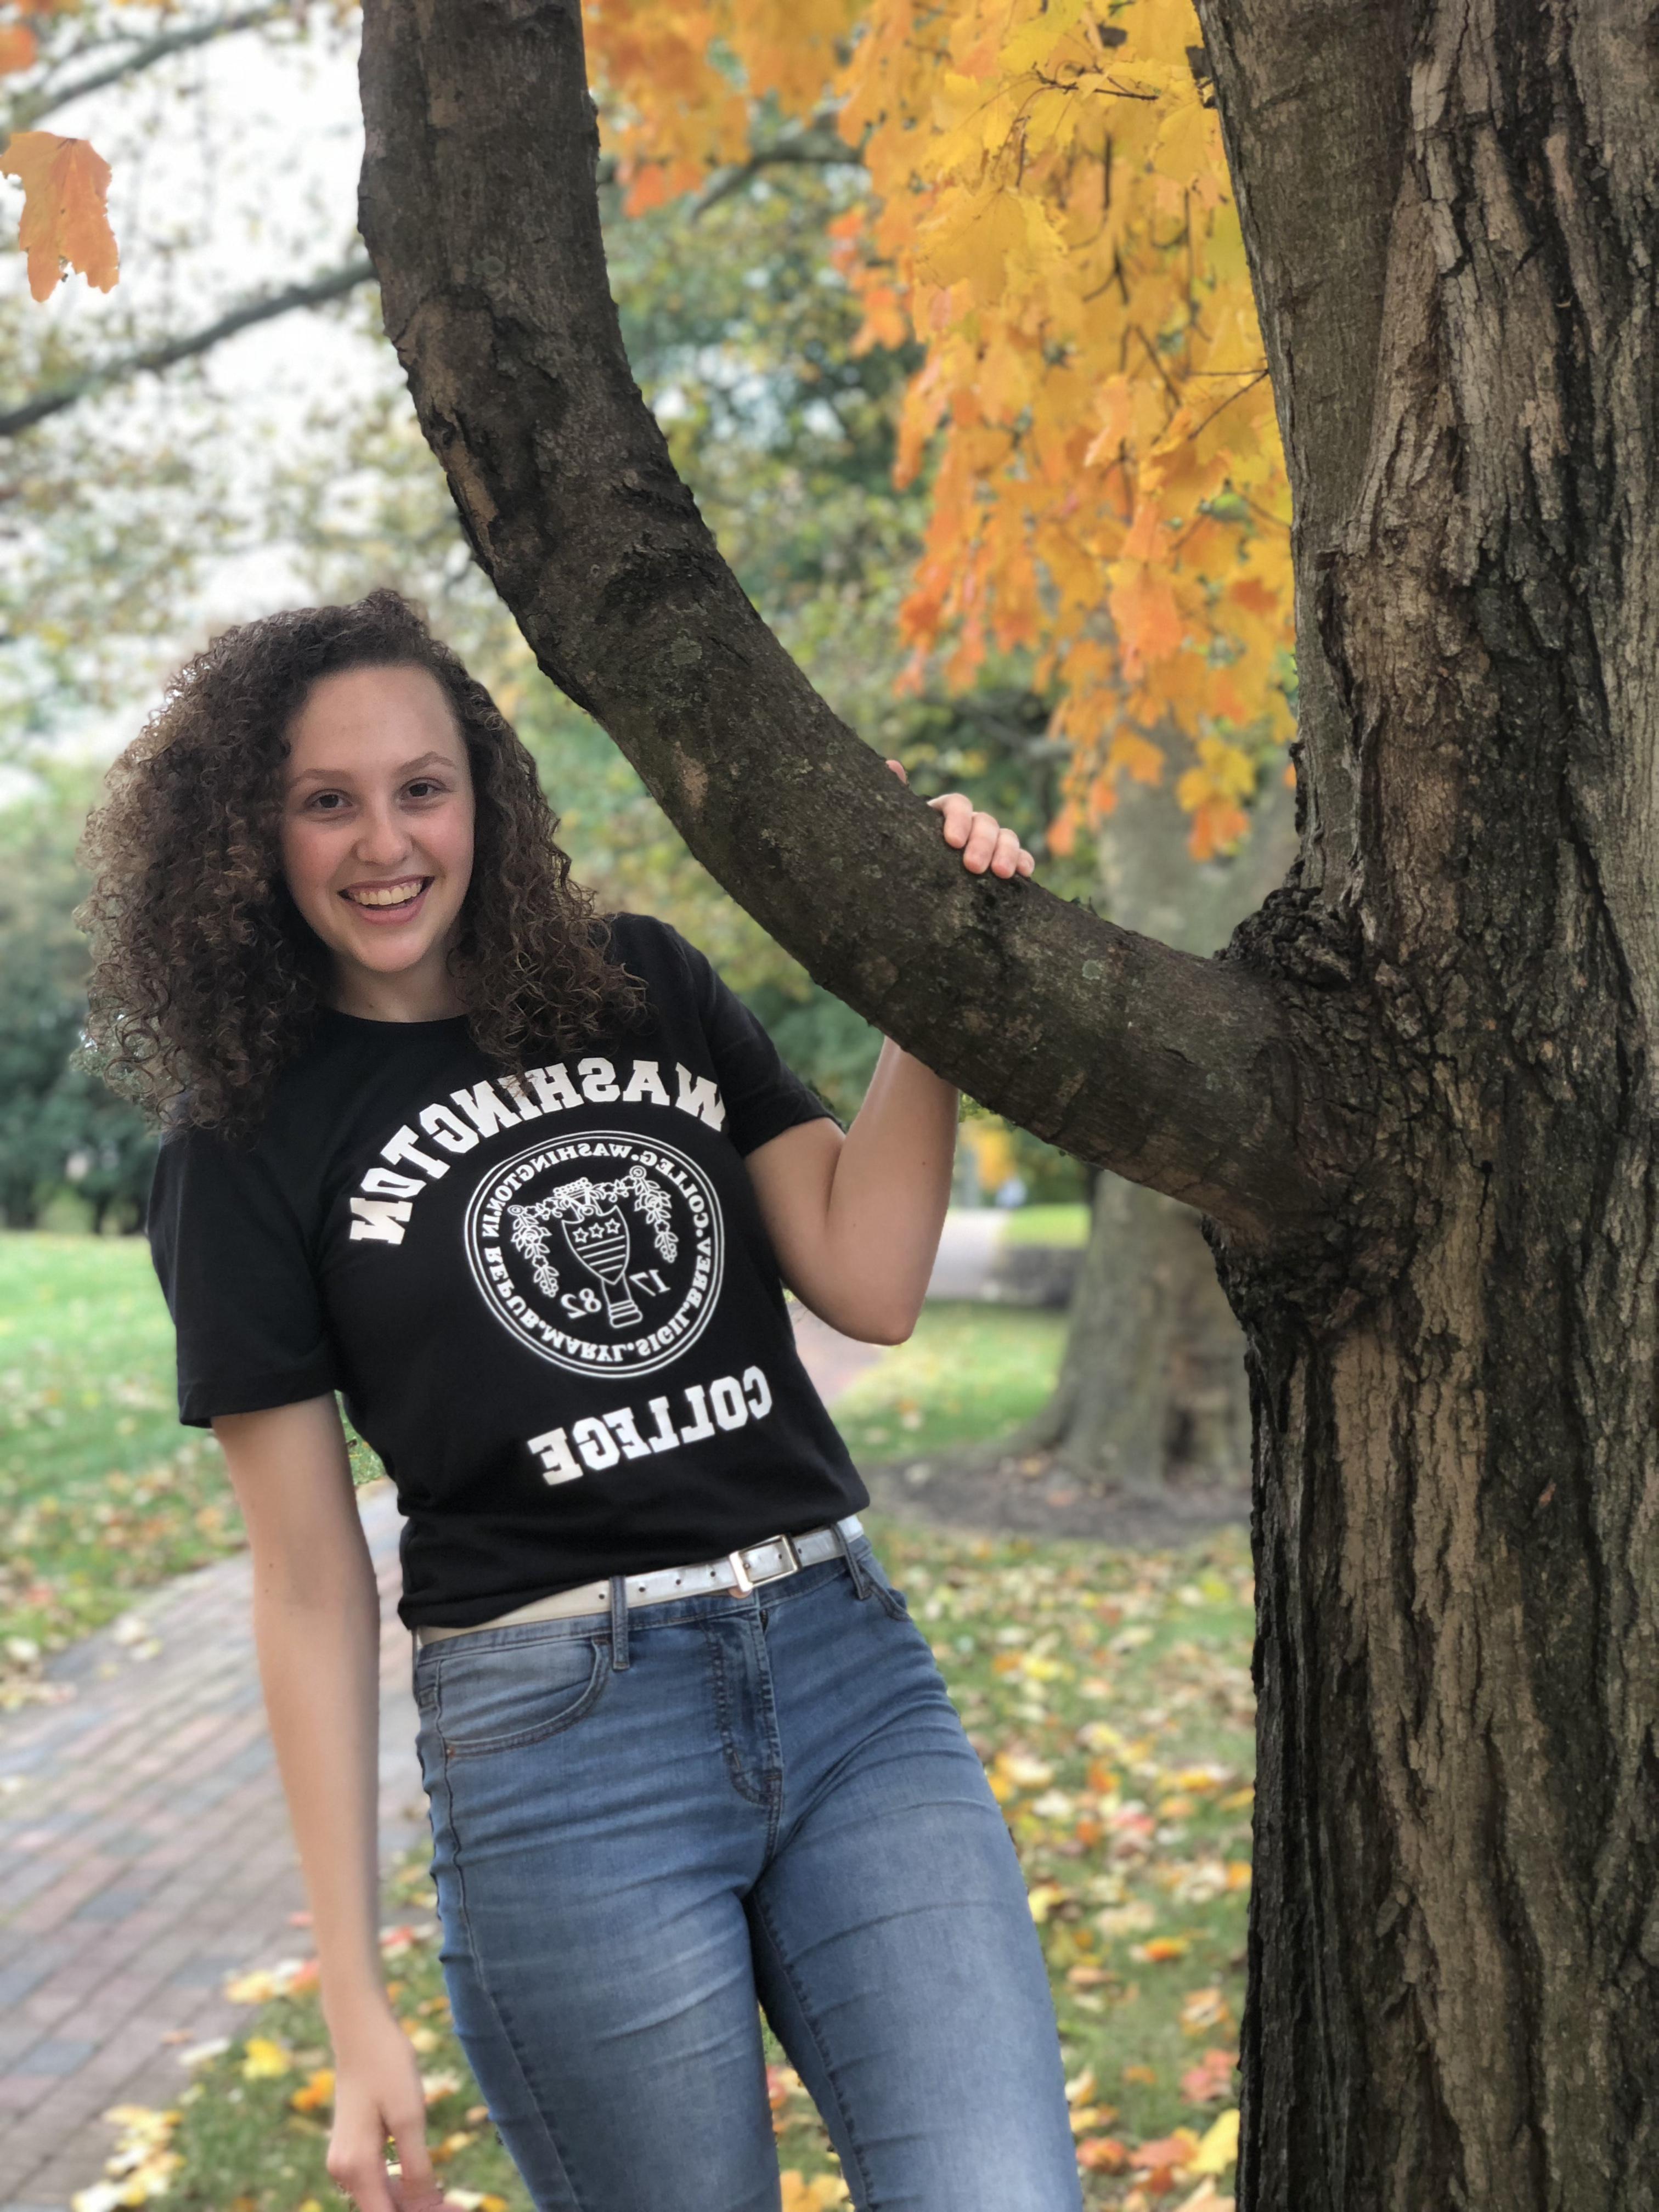 Carlee, smiling and wearing a black t-shirt with the Washington College logo, blue jeans, and a white belt in front of fall foliage. 